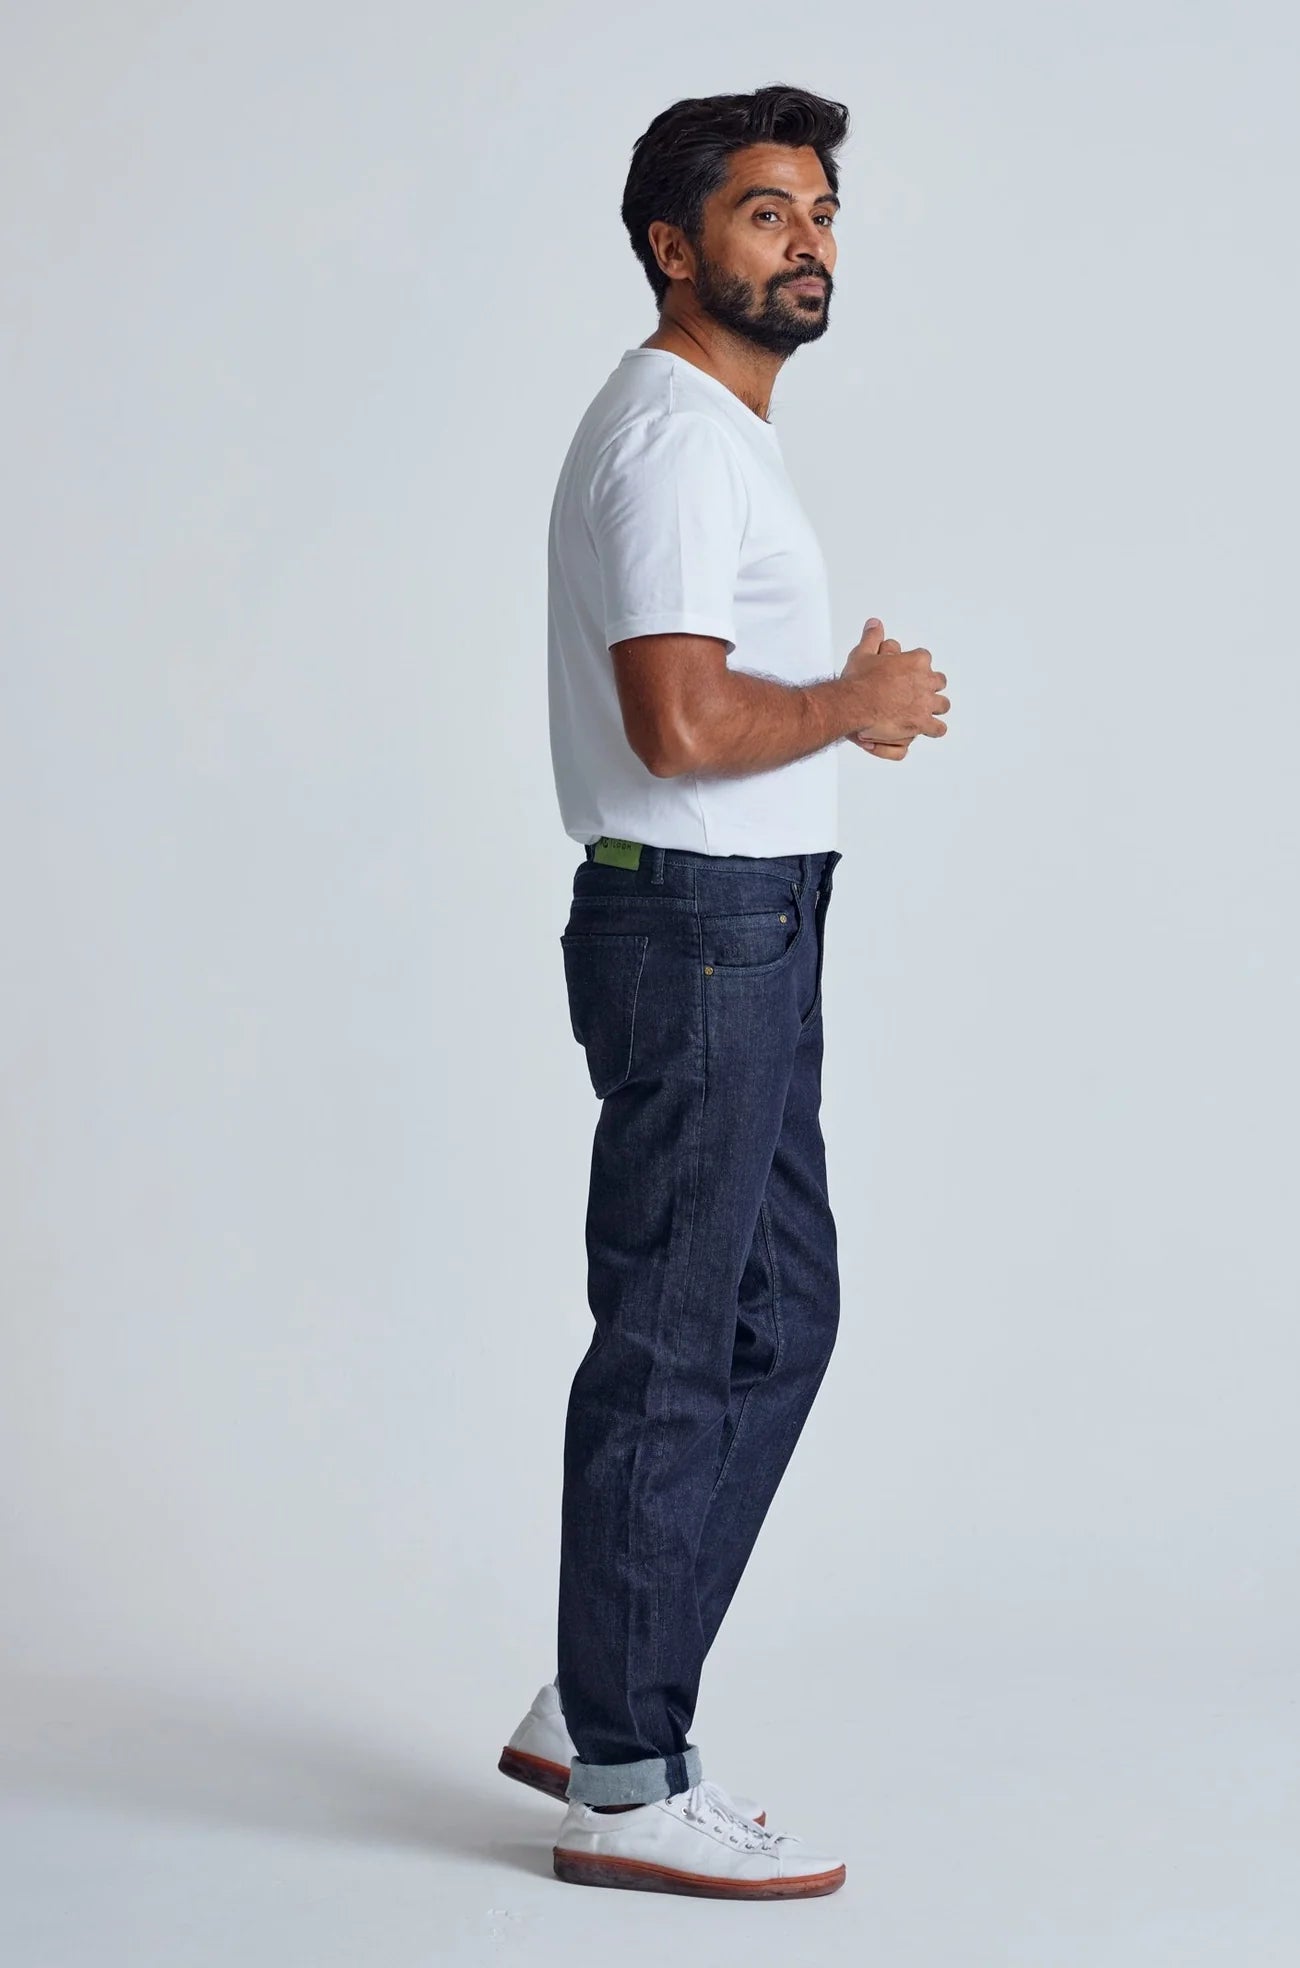 Deep Sea Miles Slim Fit Jeans GOTS Certified Organic Cotton and Recycled Polyester